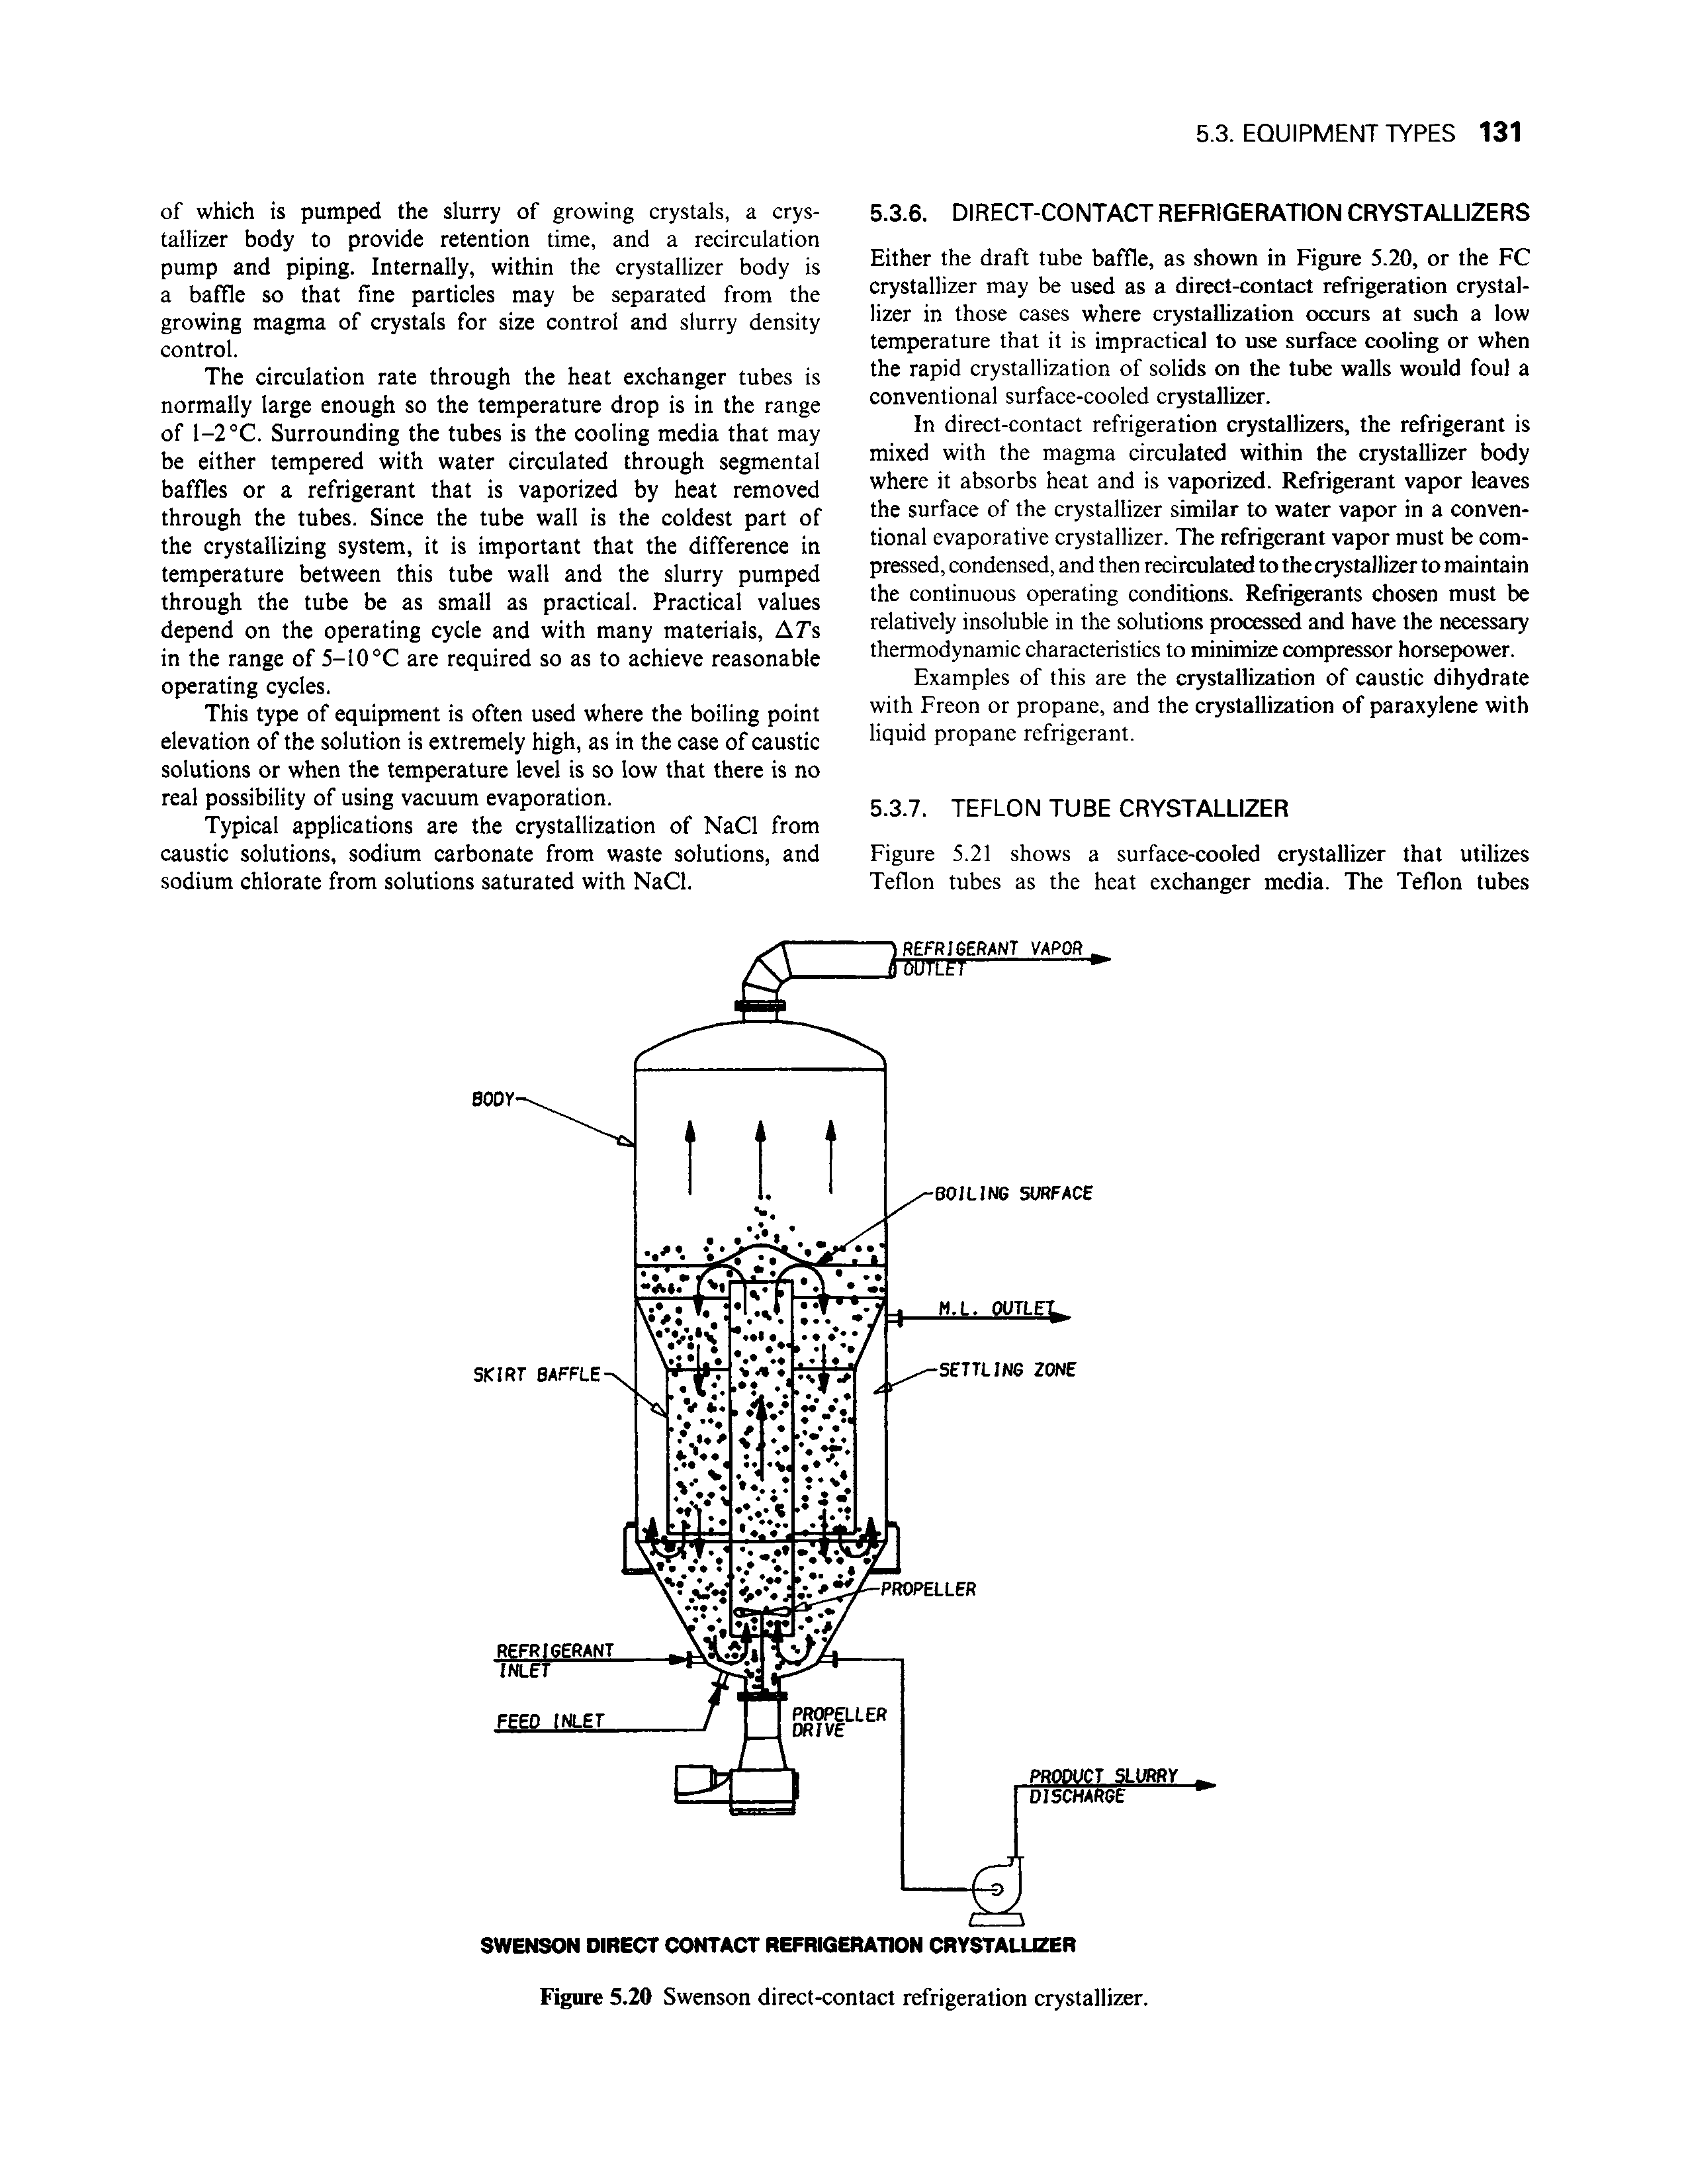 Figure 5.20 Swenson direct-contact refrigeration crystallizer.